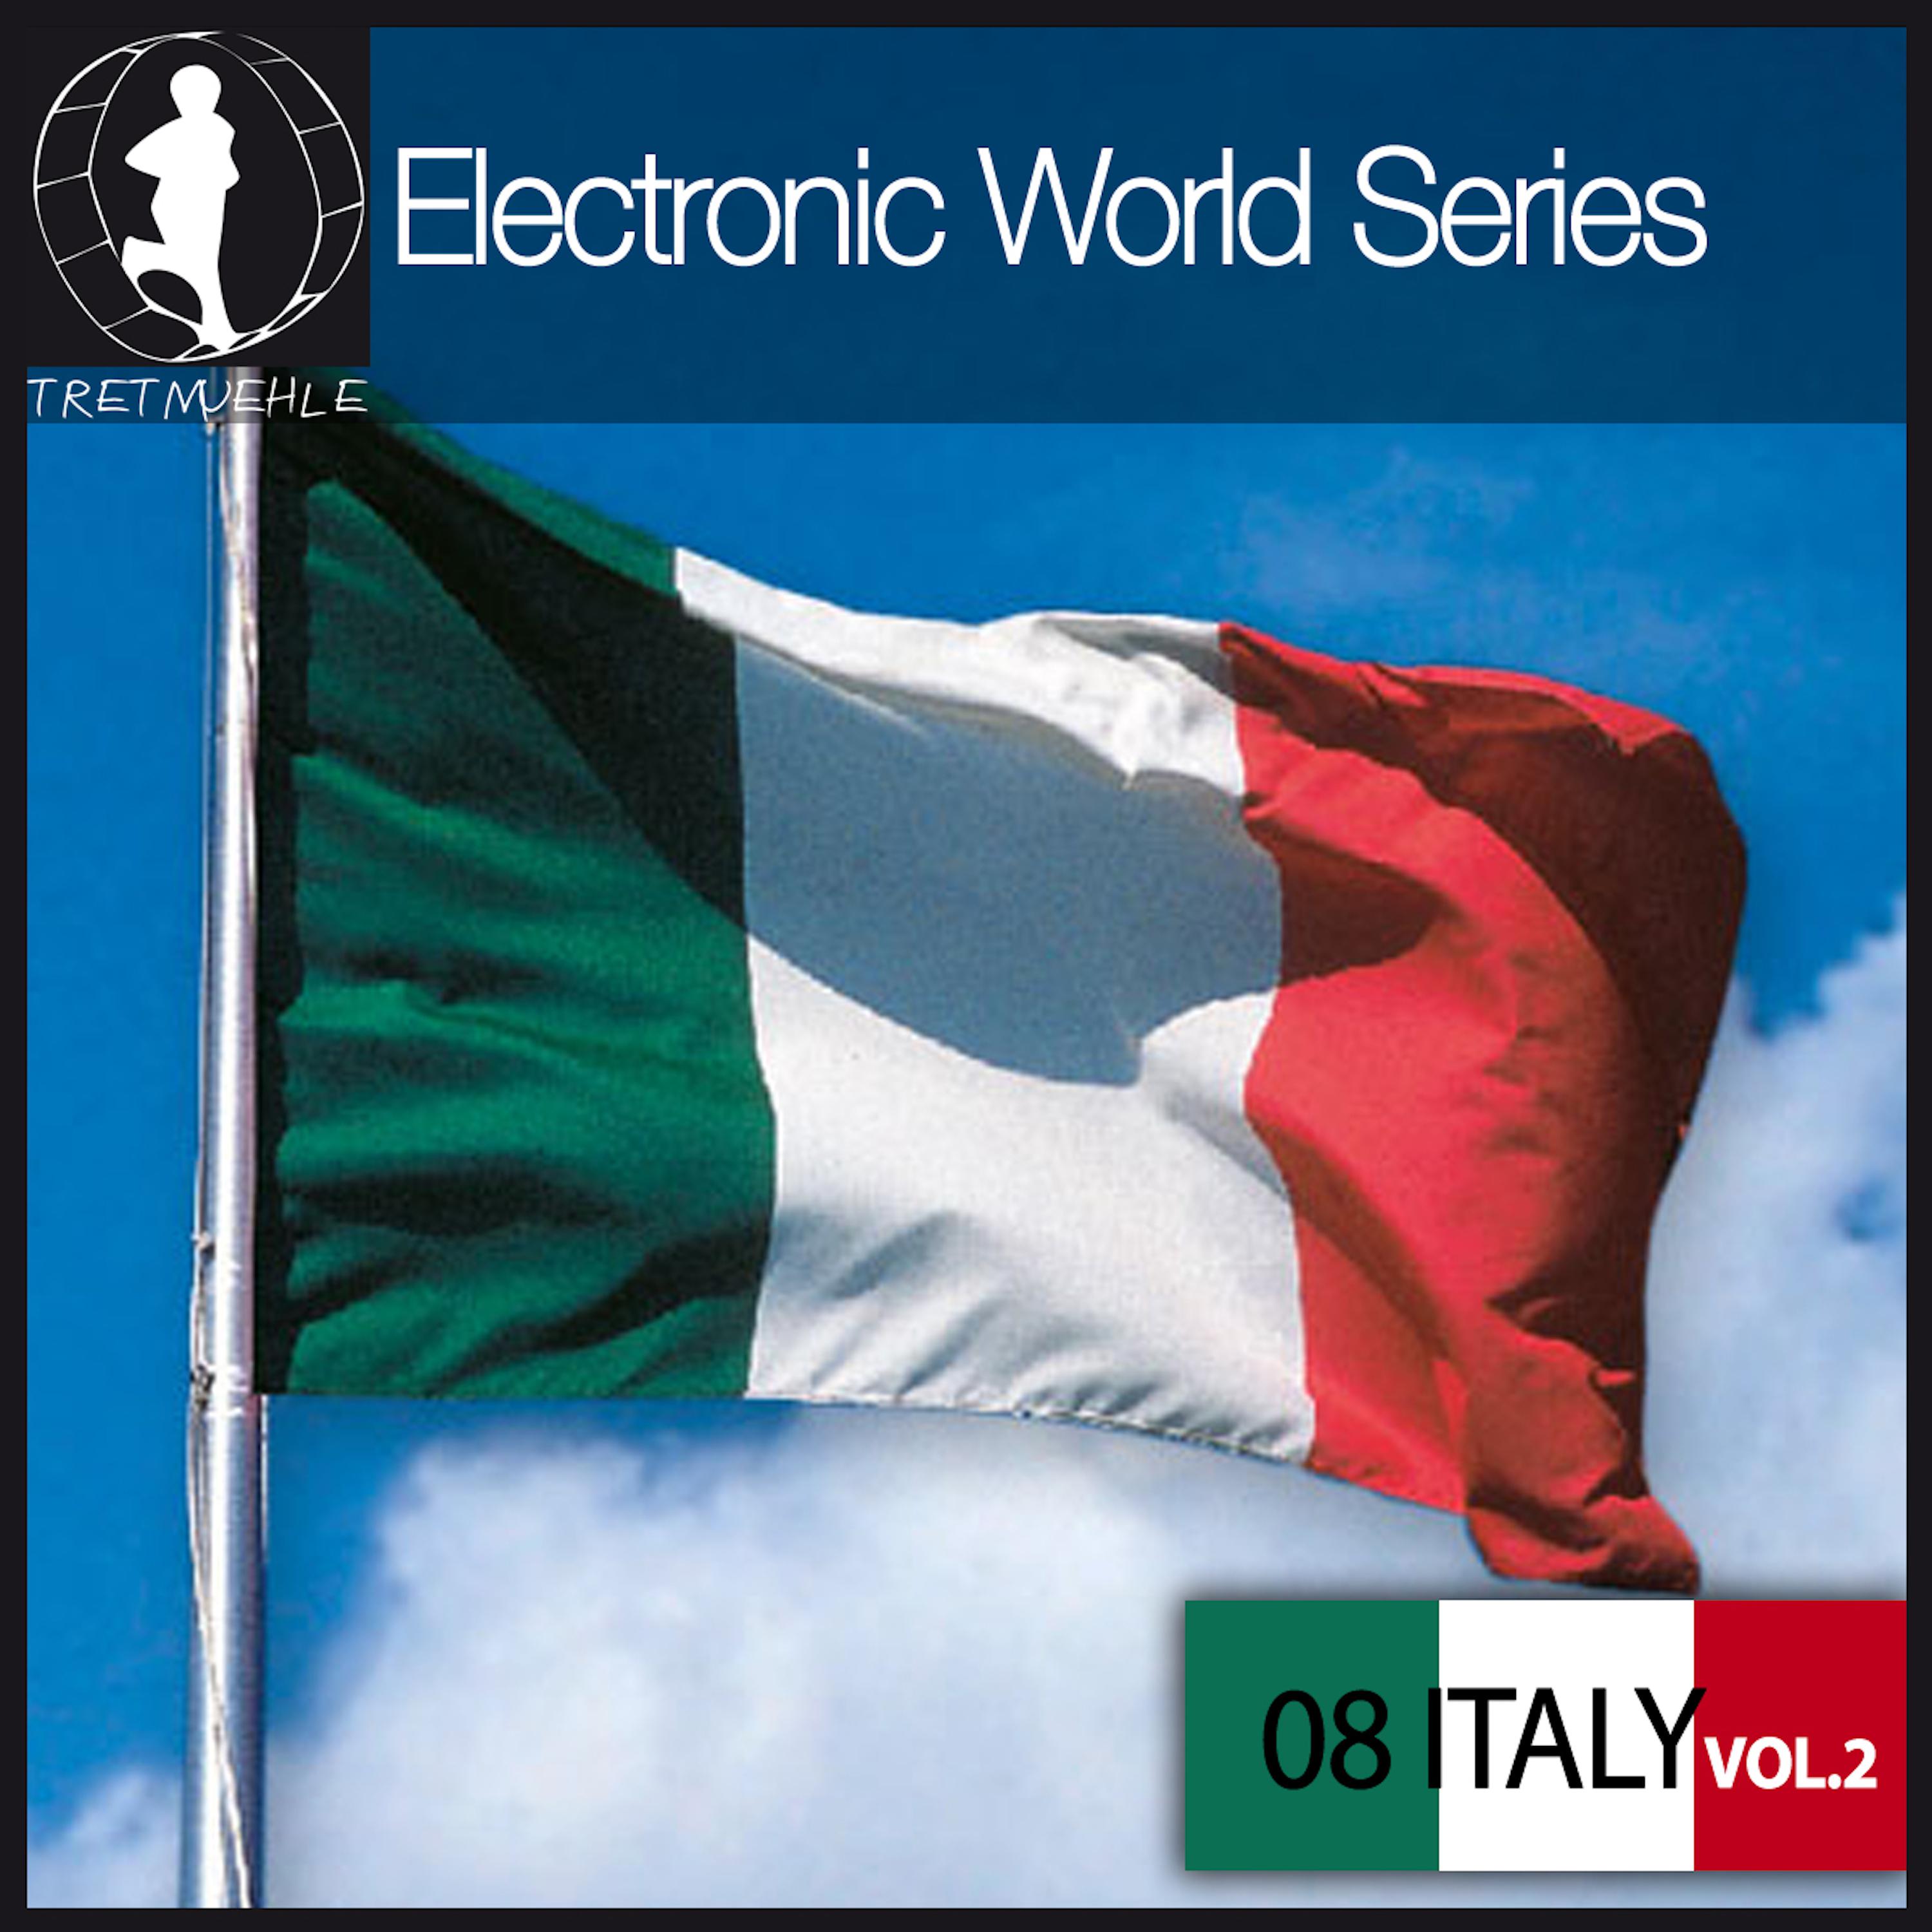 Electronic World Series 08 (Italy V.2)